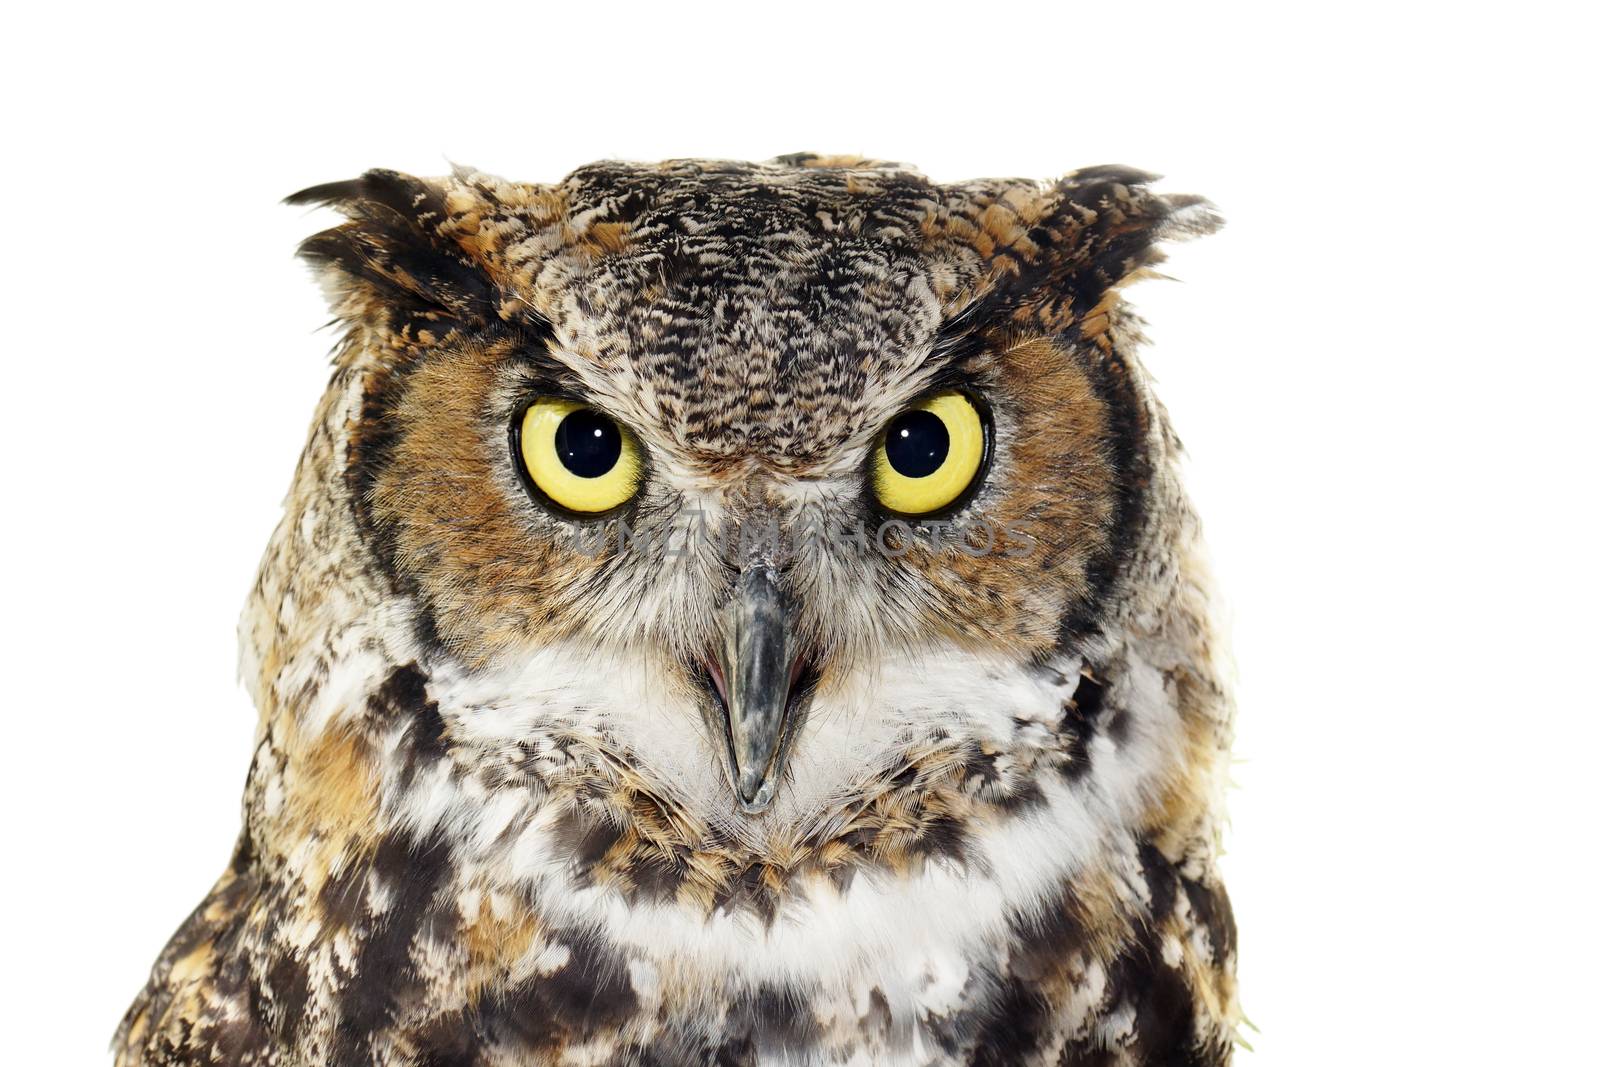 Close up portrait of Great horned owl, Bubo virginianus, looking at camera, isolated on white       